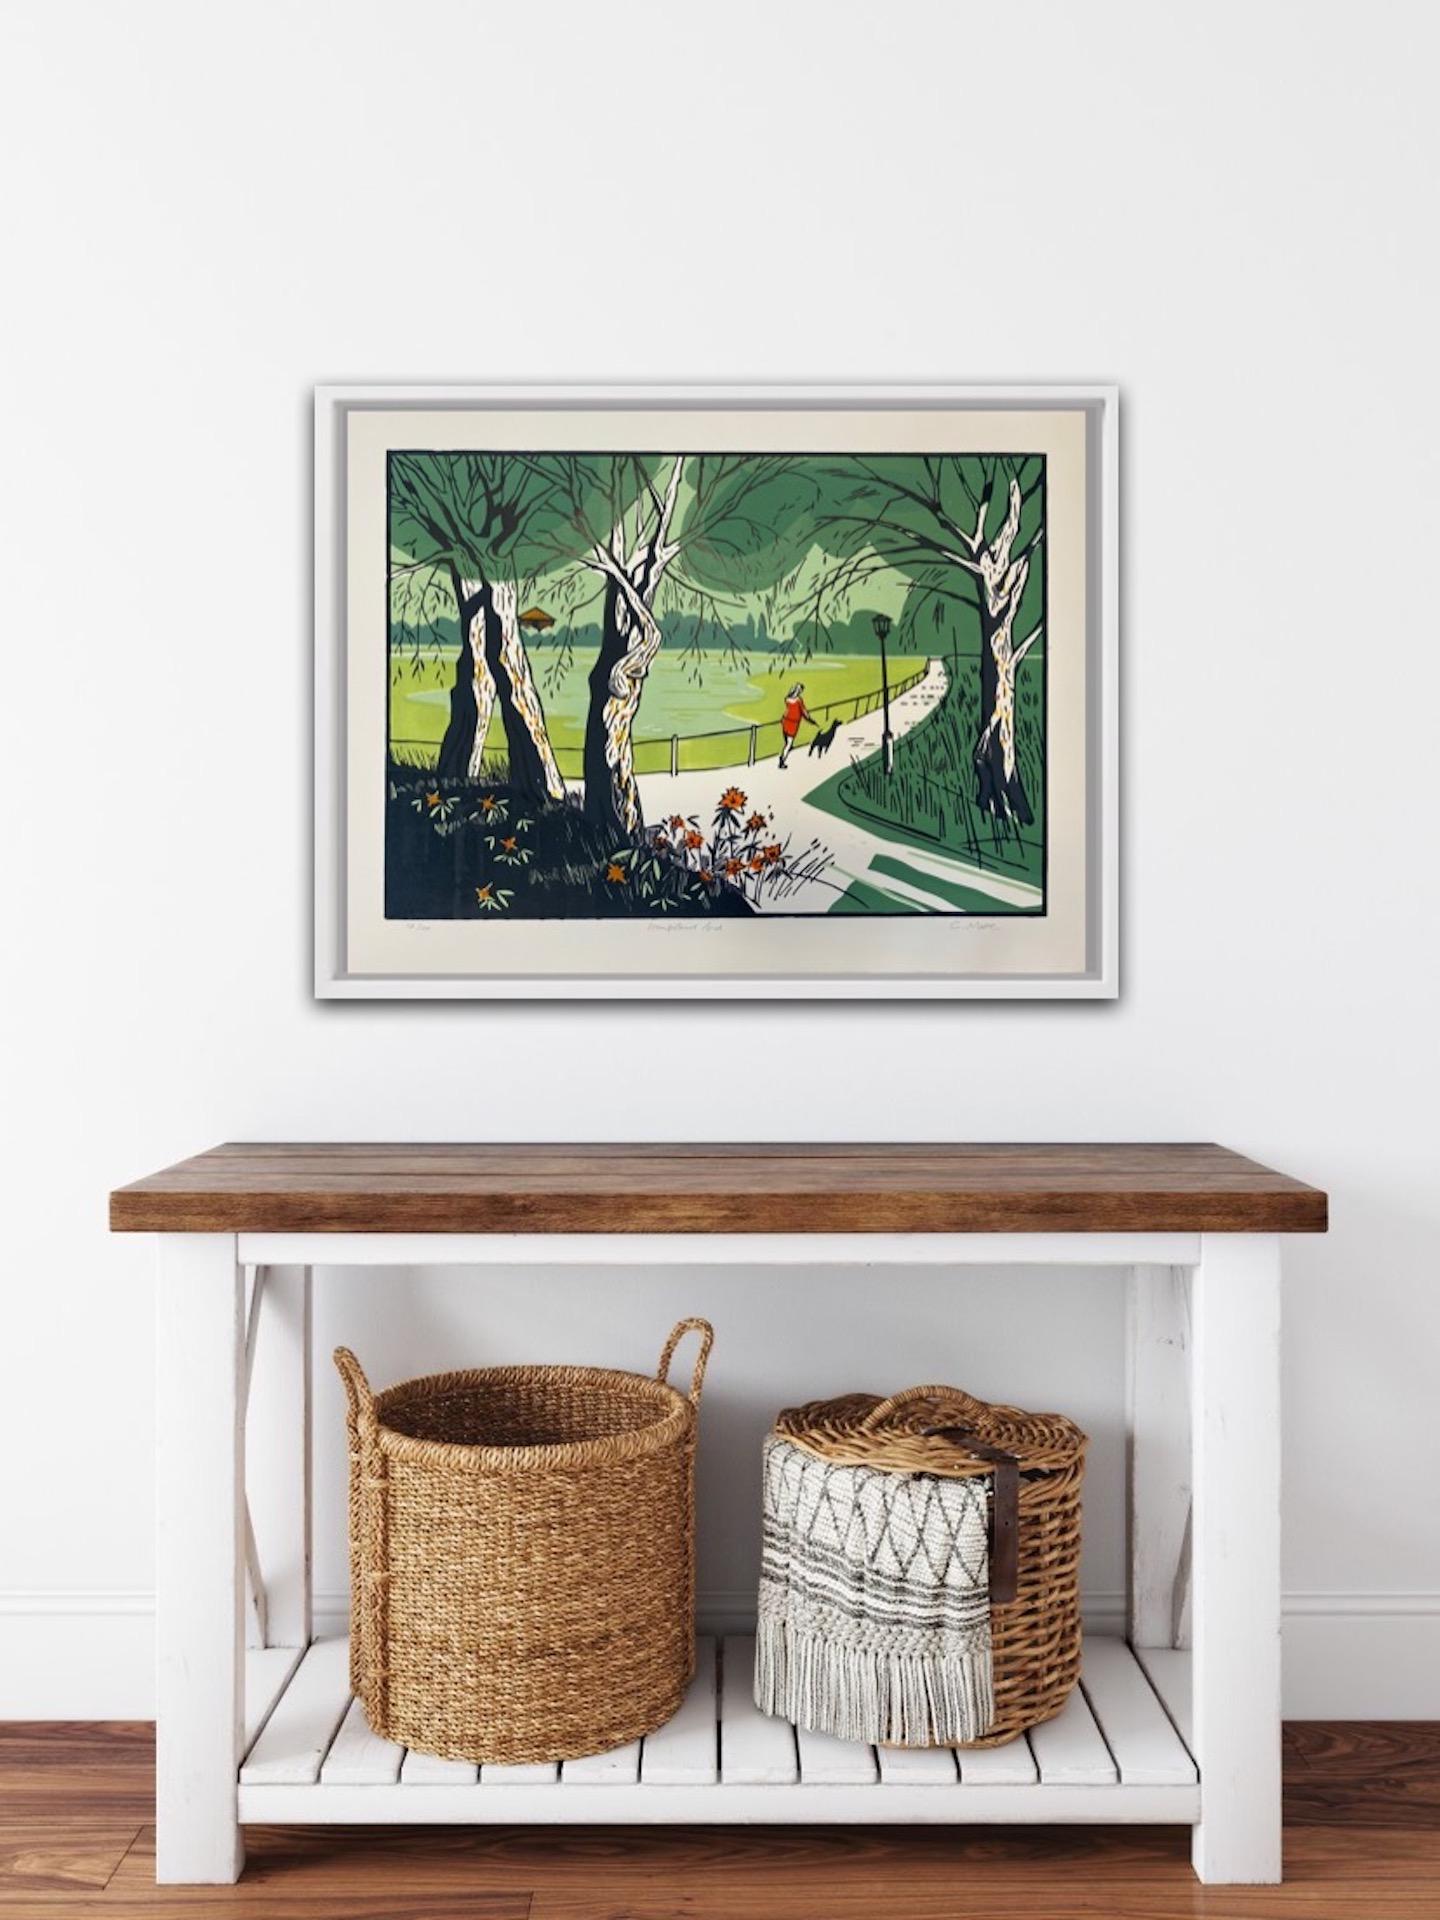 Colin Moore, Hampstead Pond, Limited Edition Print, Art Online, Contemporary Art For Sale 5